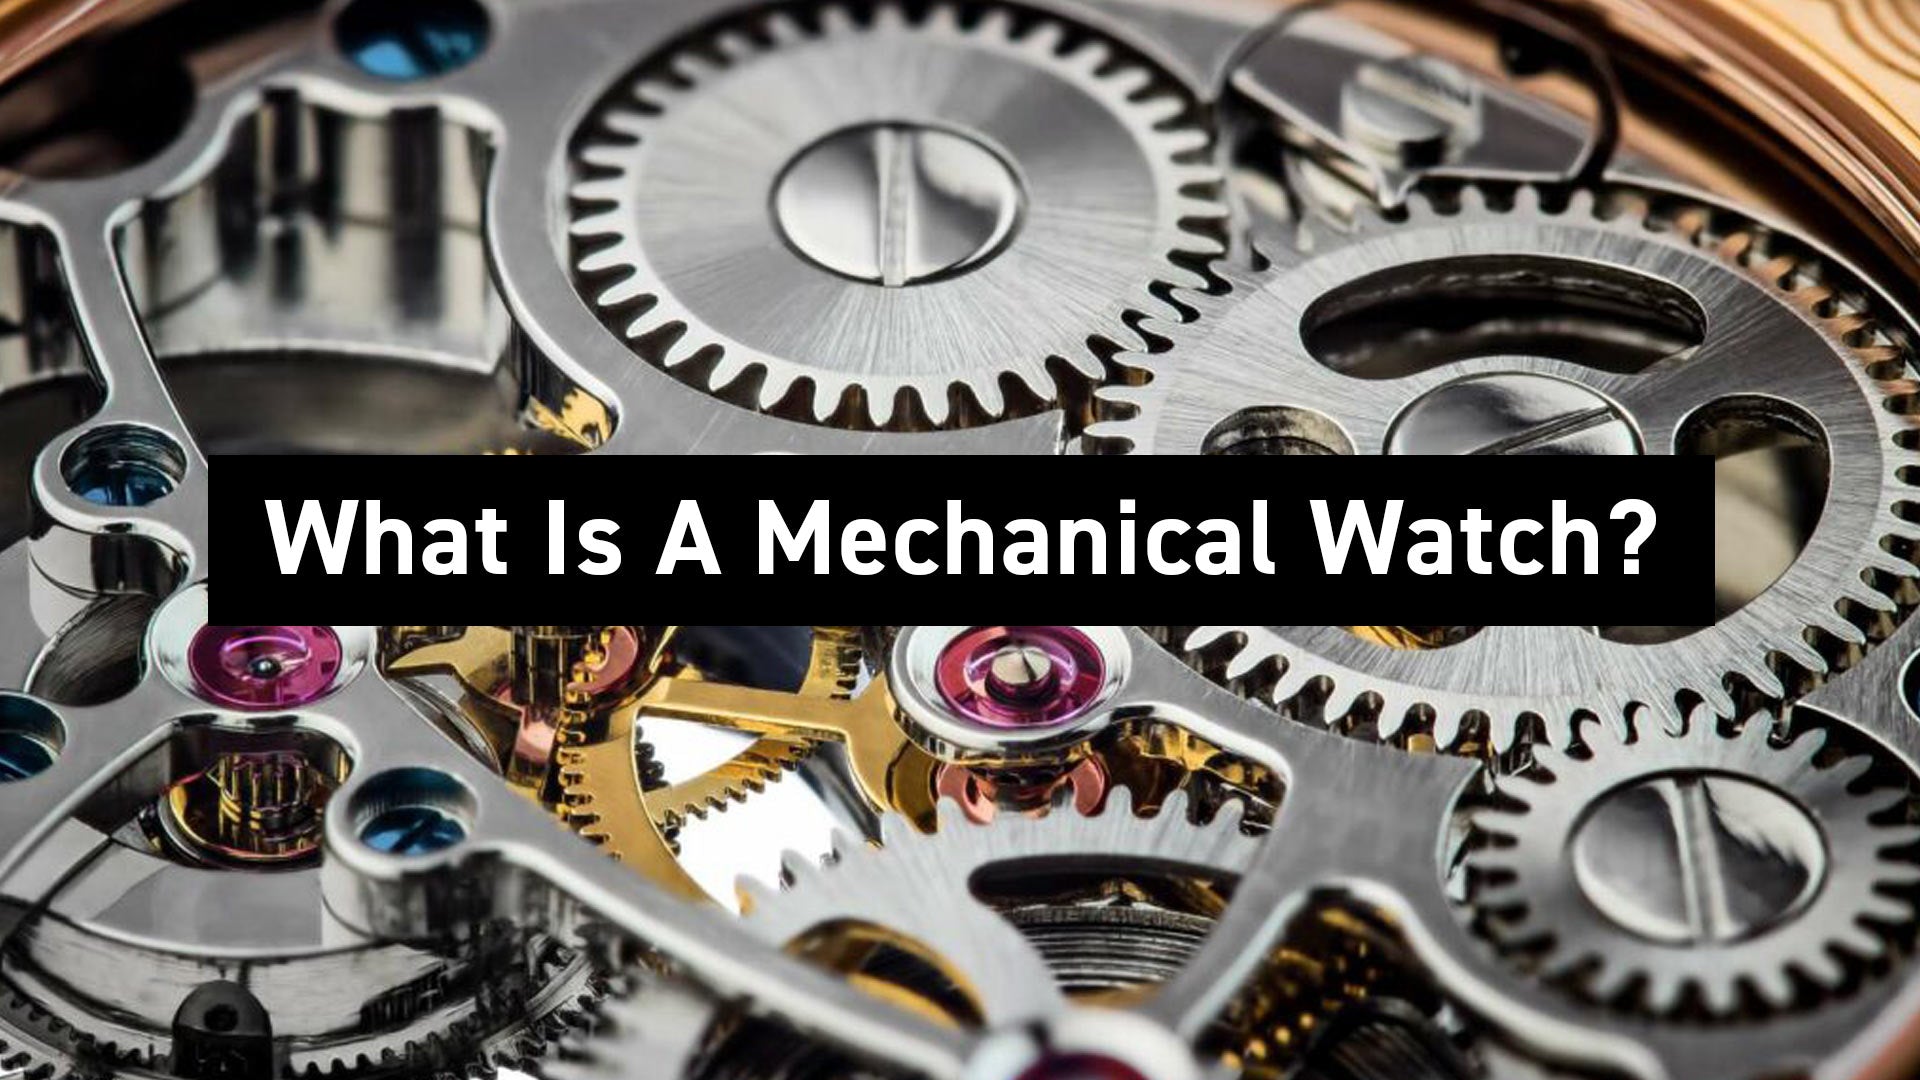 What Is A Mechanical Watch?